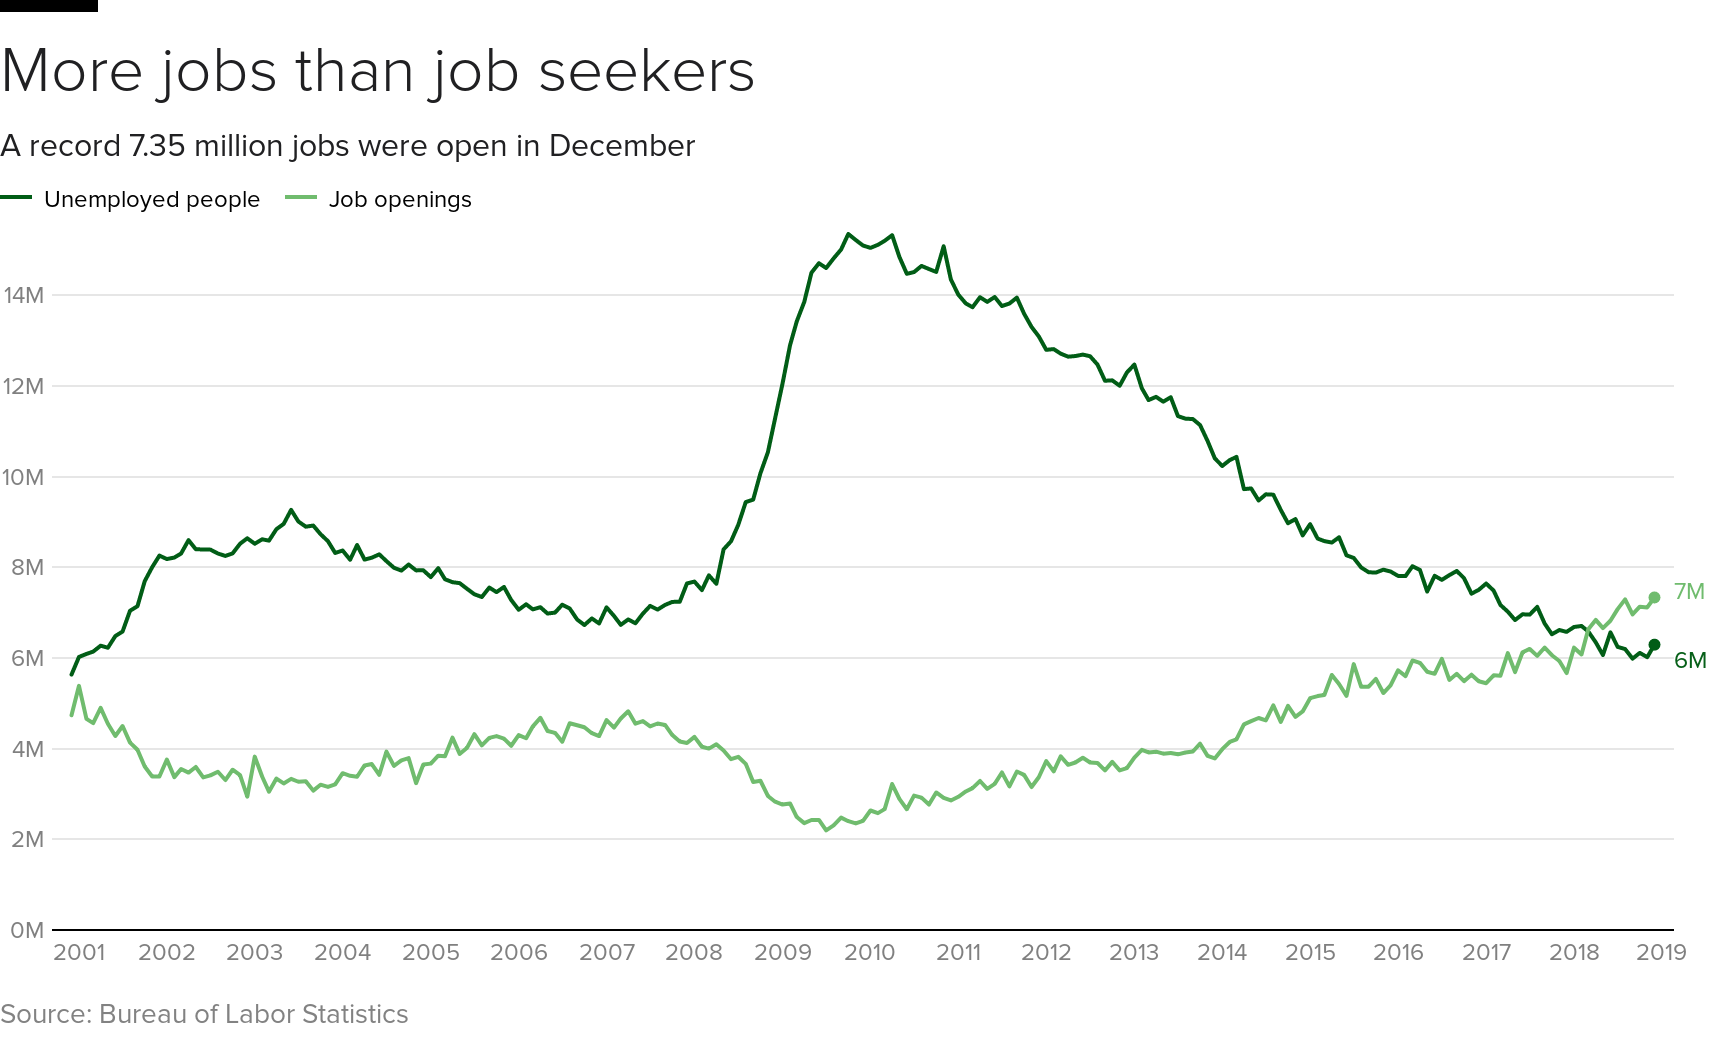 U.S. job openings jump to their highest level in nearly two decades